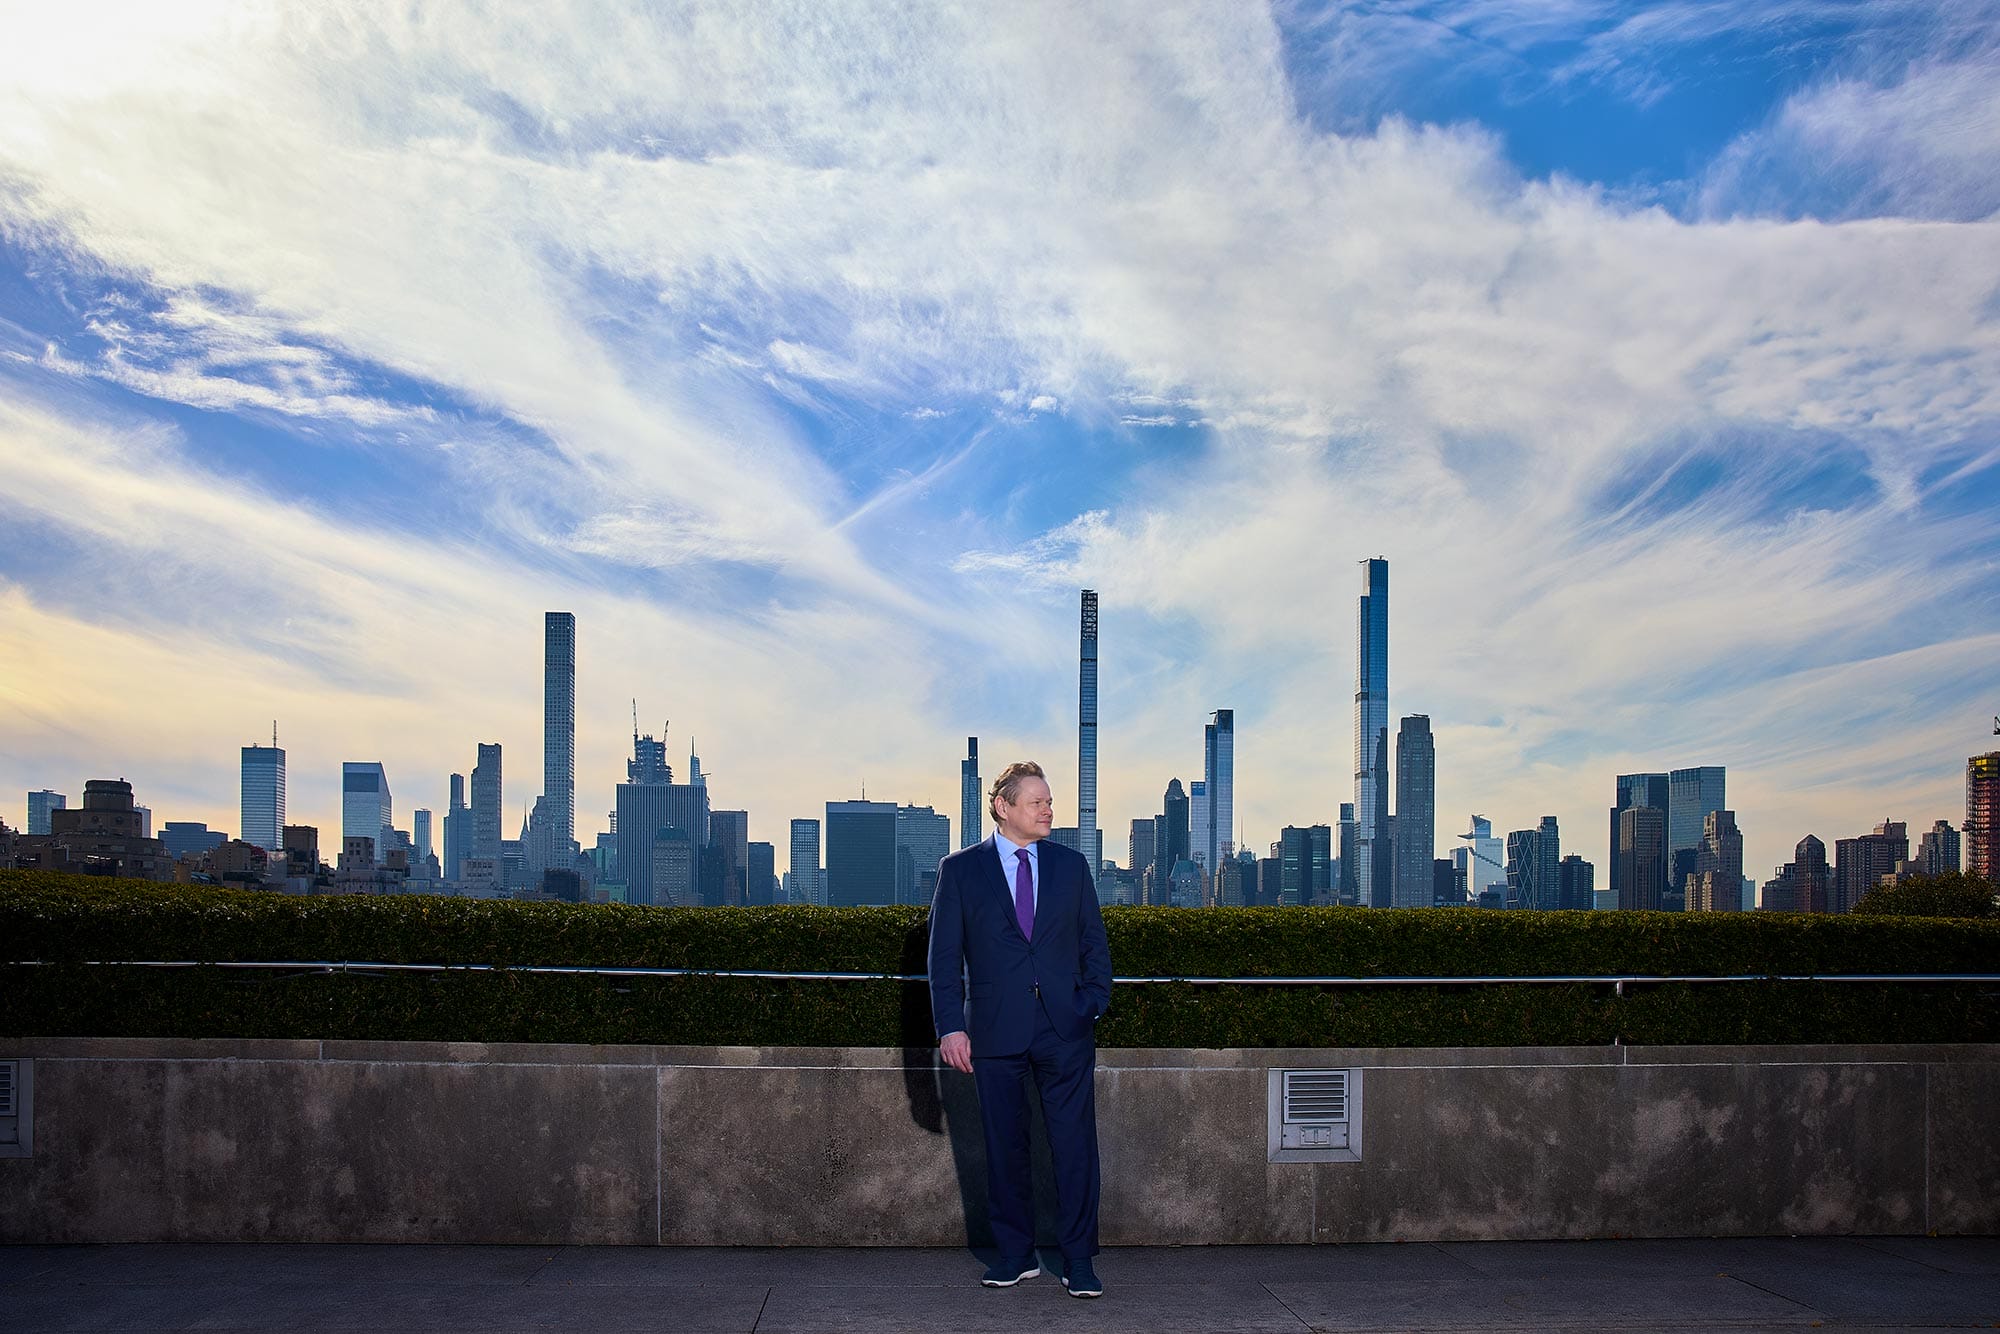 Wolfram Koeppe standing on a rooftop with the New York City skyline behind him.